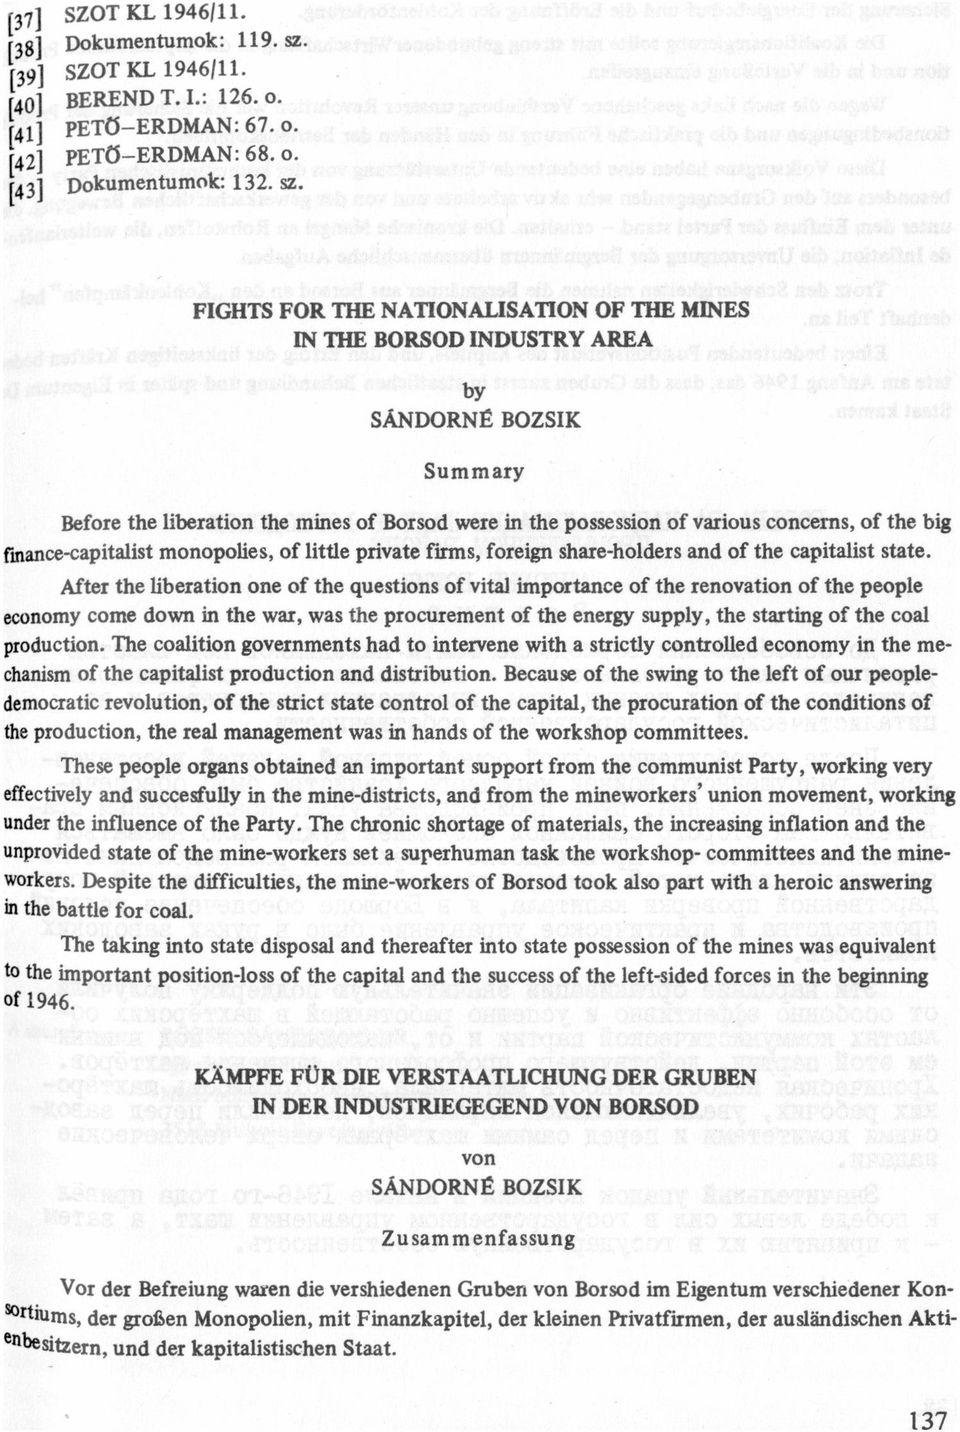 FIGHIS FOR THE NATIONALISATION OF 'I'HE MINES ln THE BORSOD INDUSTRY AREA by SÁNDORNÉ BOZSIK Summry Before the libertion the mines of Borsod were in the possession of vrious concems, of the big